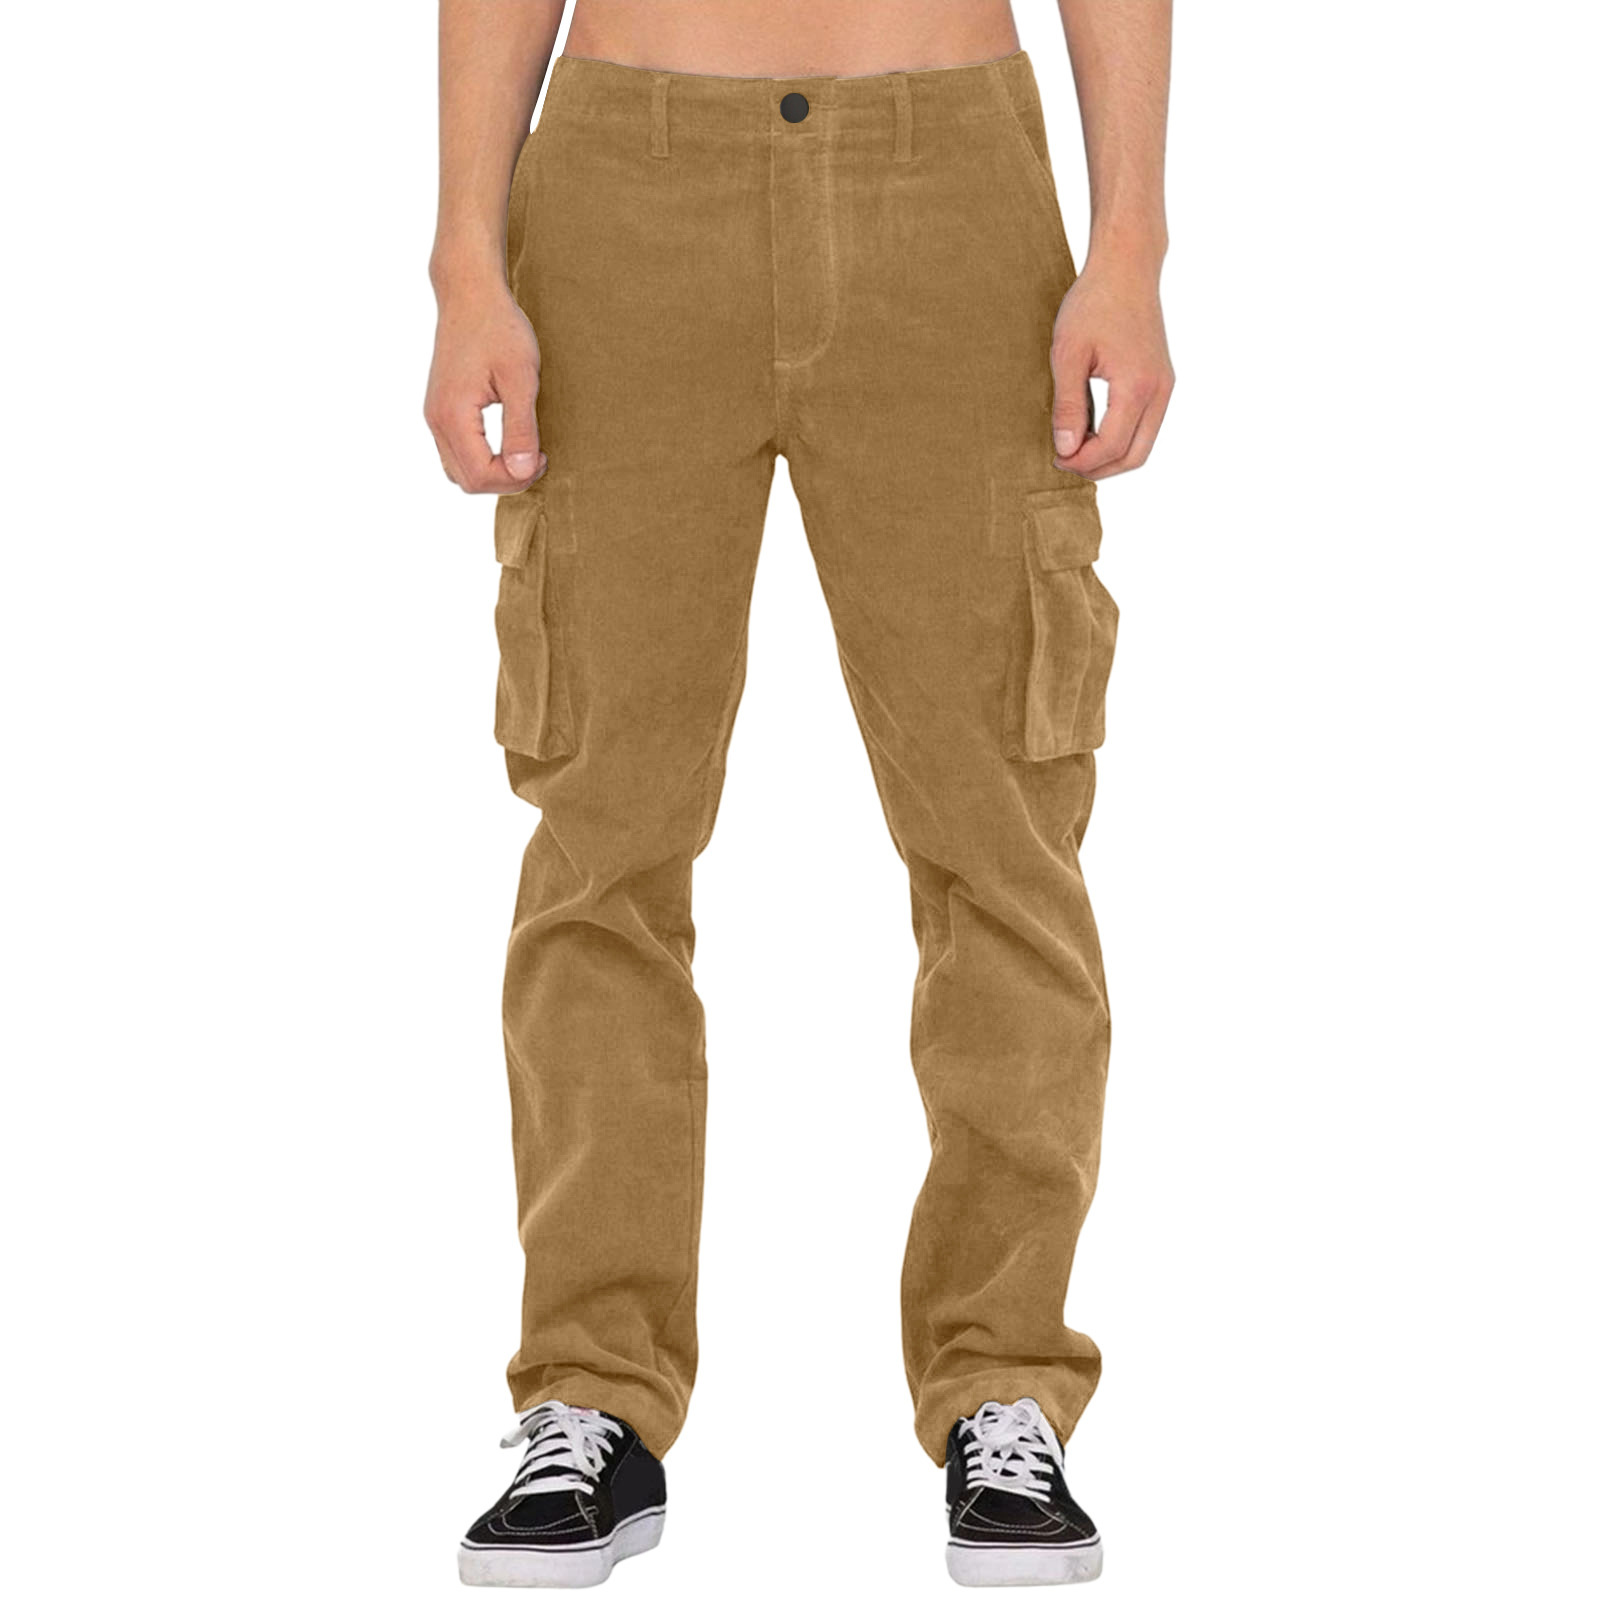 Men's Outdoor Autumn And Chic Winter Corduroy Trousers